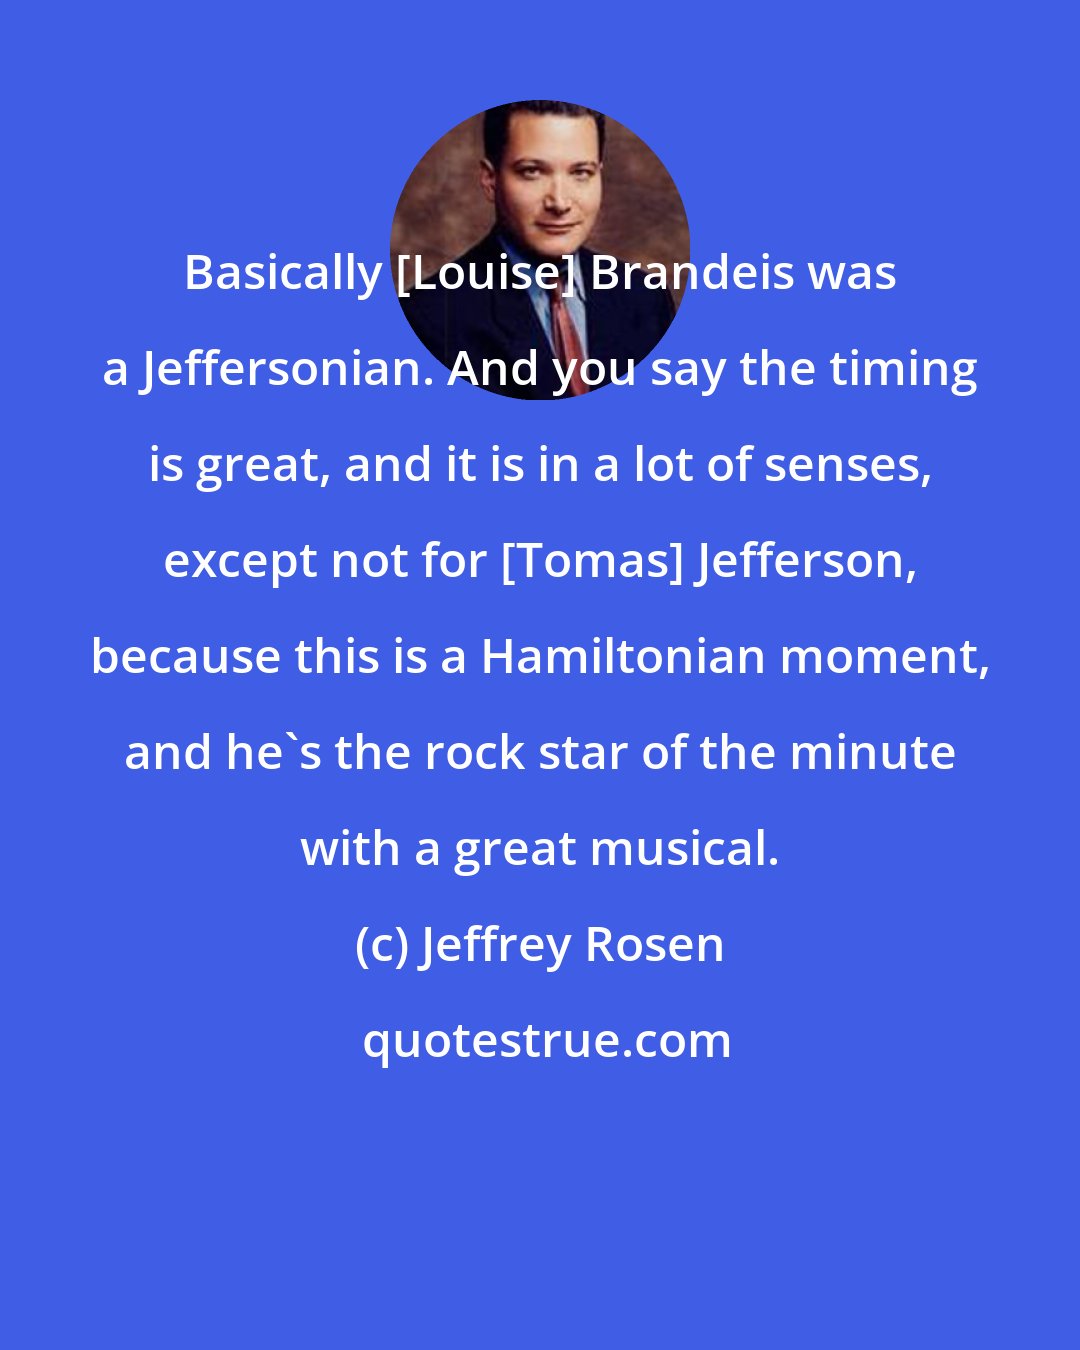 Jeffrey Rosen: Basically [Louise] Brandeis was a Jeffersonian. And you say the timing is great, and it is in a lot of senses, except not for [Tomas] Jefferson, because this is a Hamiltonian moment, and he's the rock star of the minute with a great musical.